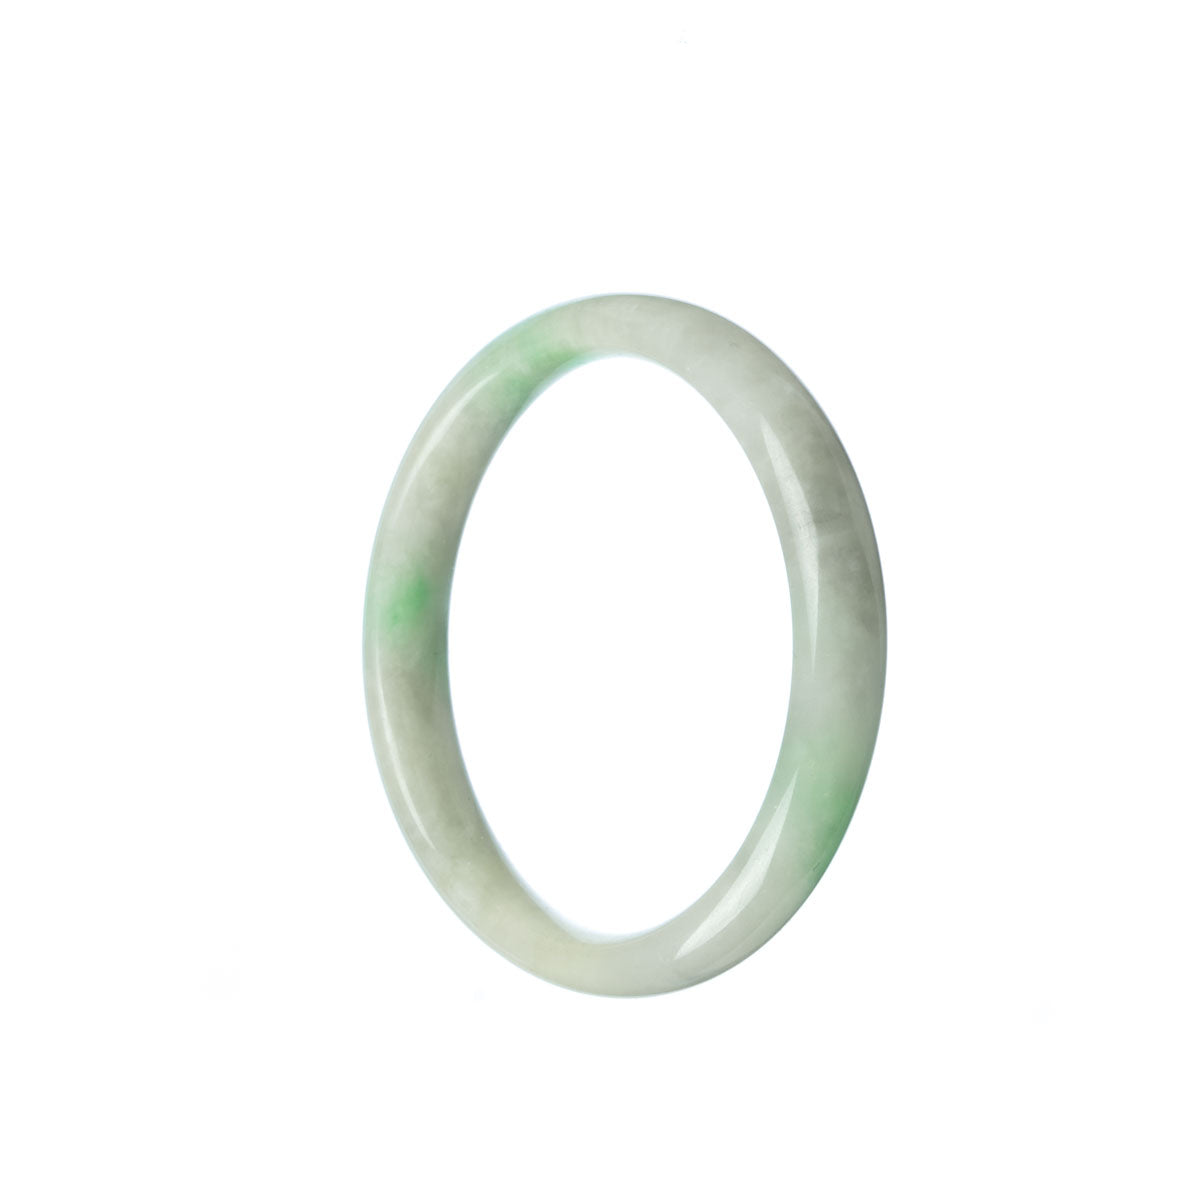 A beautiful green jade bracelet in the shape of a half moon, made from genuine Grade A green jadeite jade. Perfect for adding a touch of elegance to any outfit.